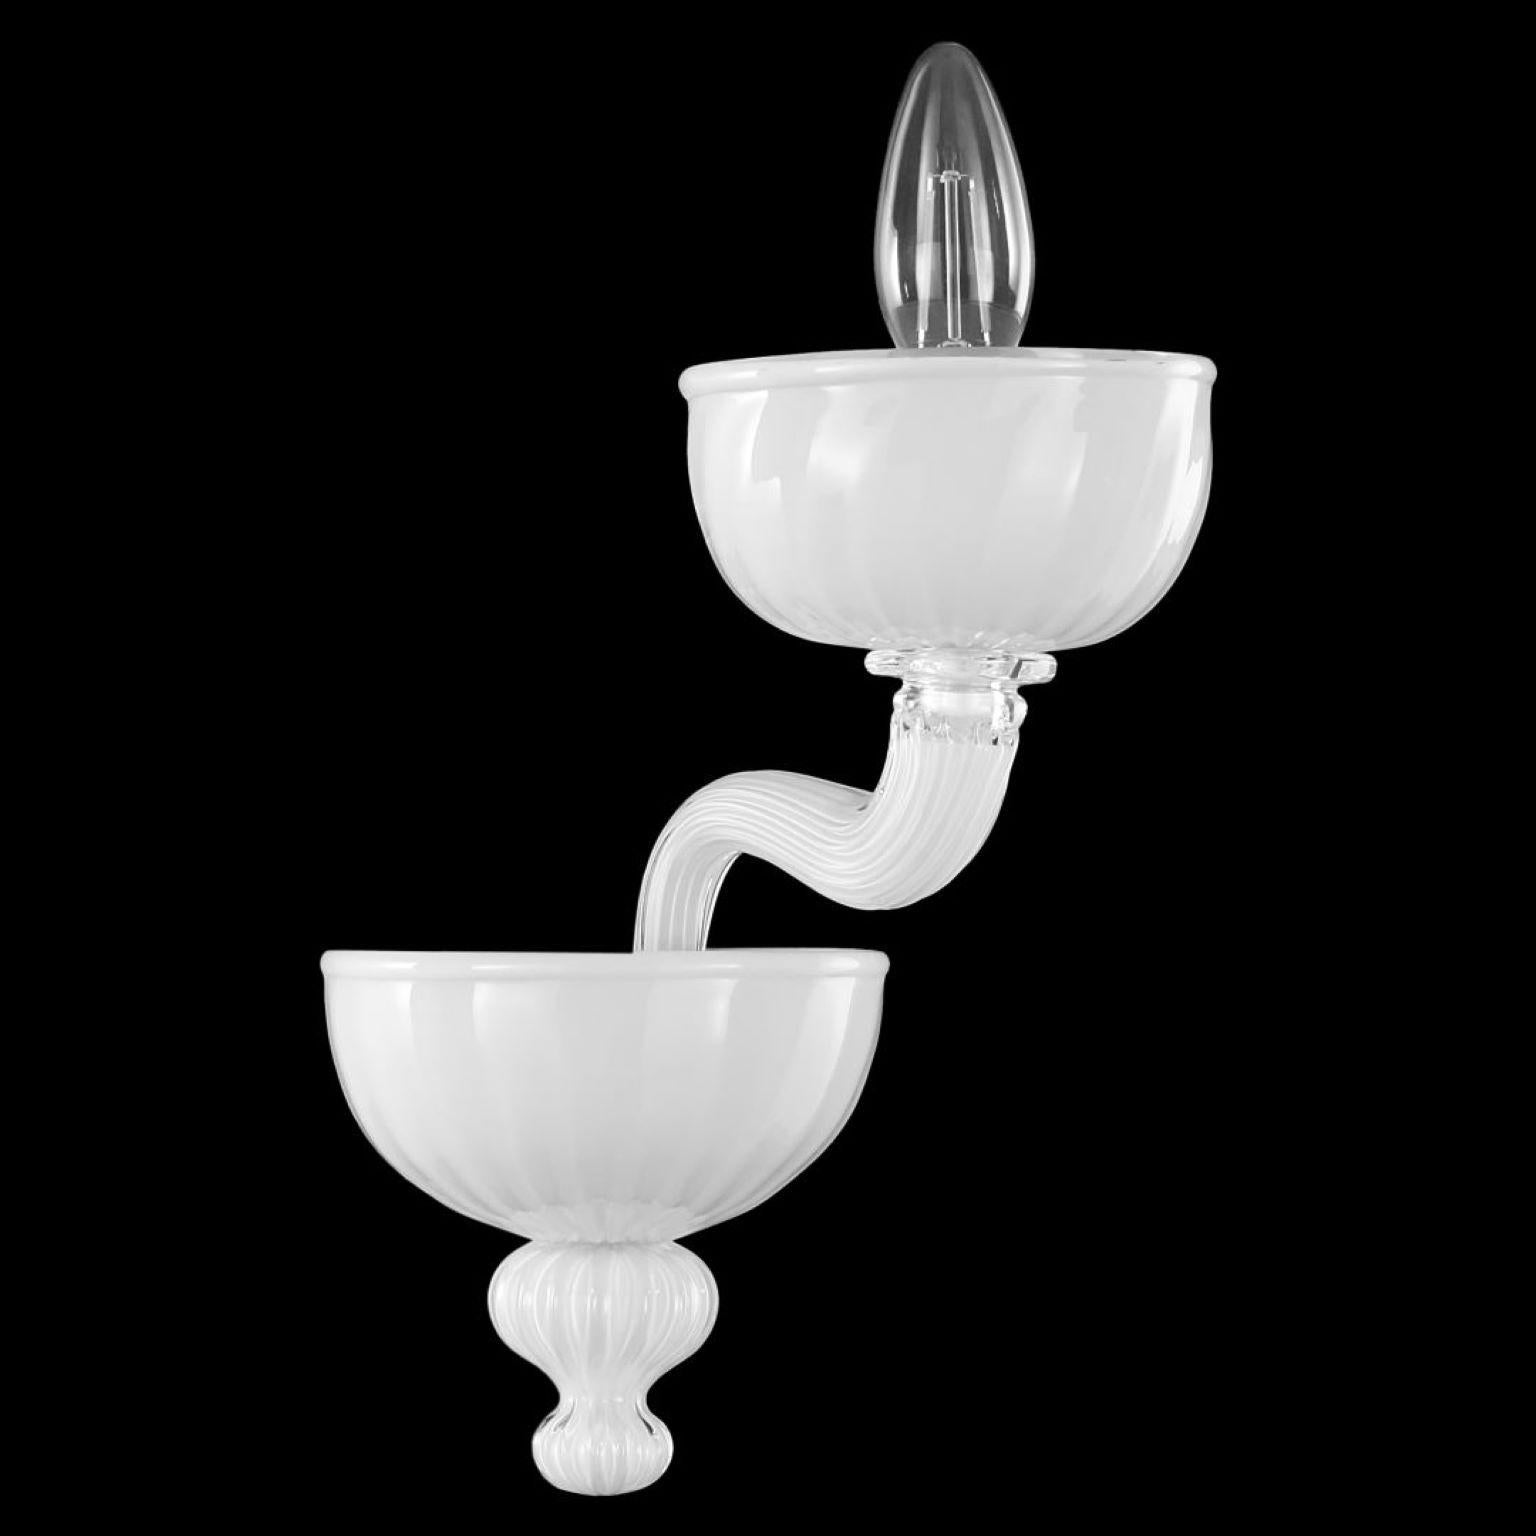 Rigadin sconce 1 arm white Murano glass by Multiforme
Edgar collection stands out thanks to its harmonious and balanced shapes. It has a clean structure, whose elements are perfectly proportioned.
All the elements that form either the sconces or the